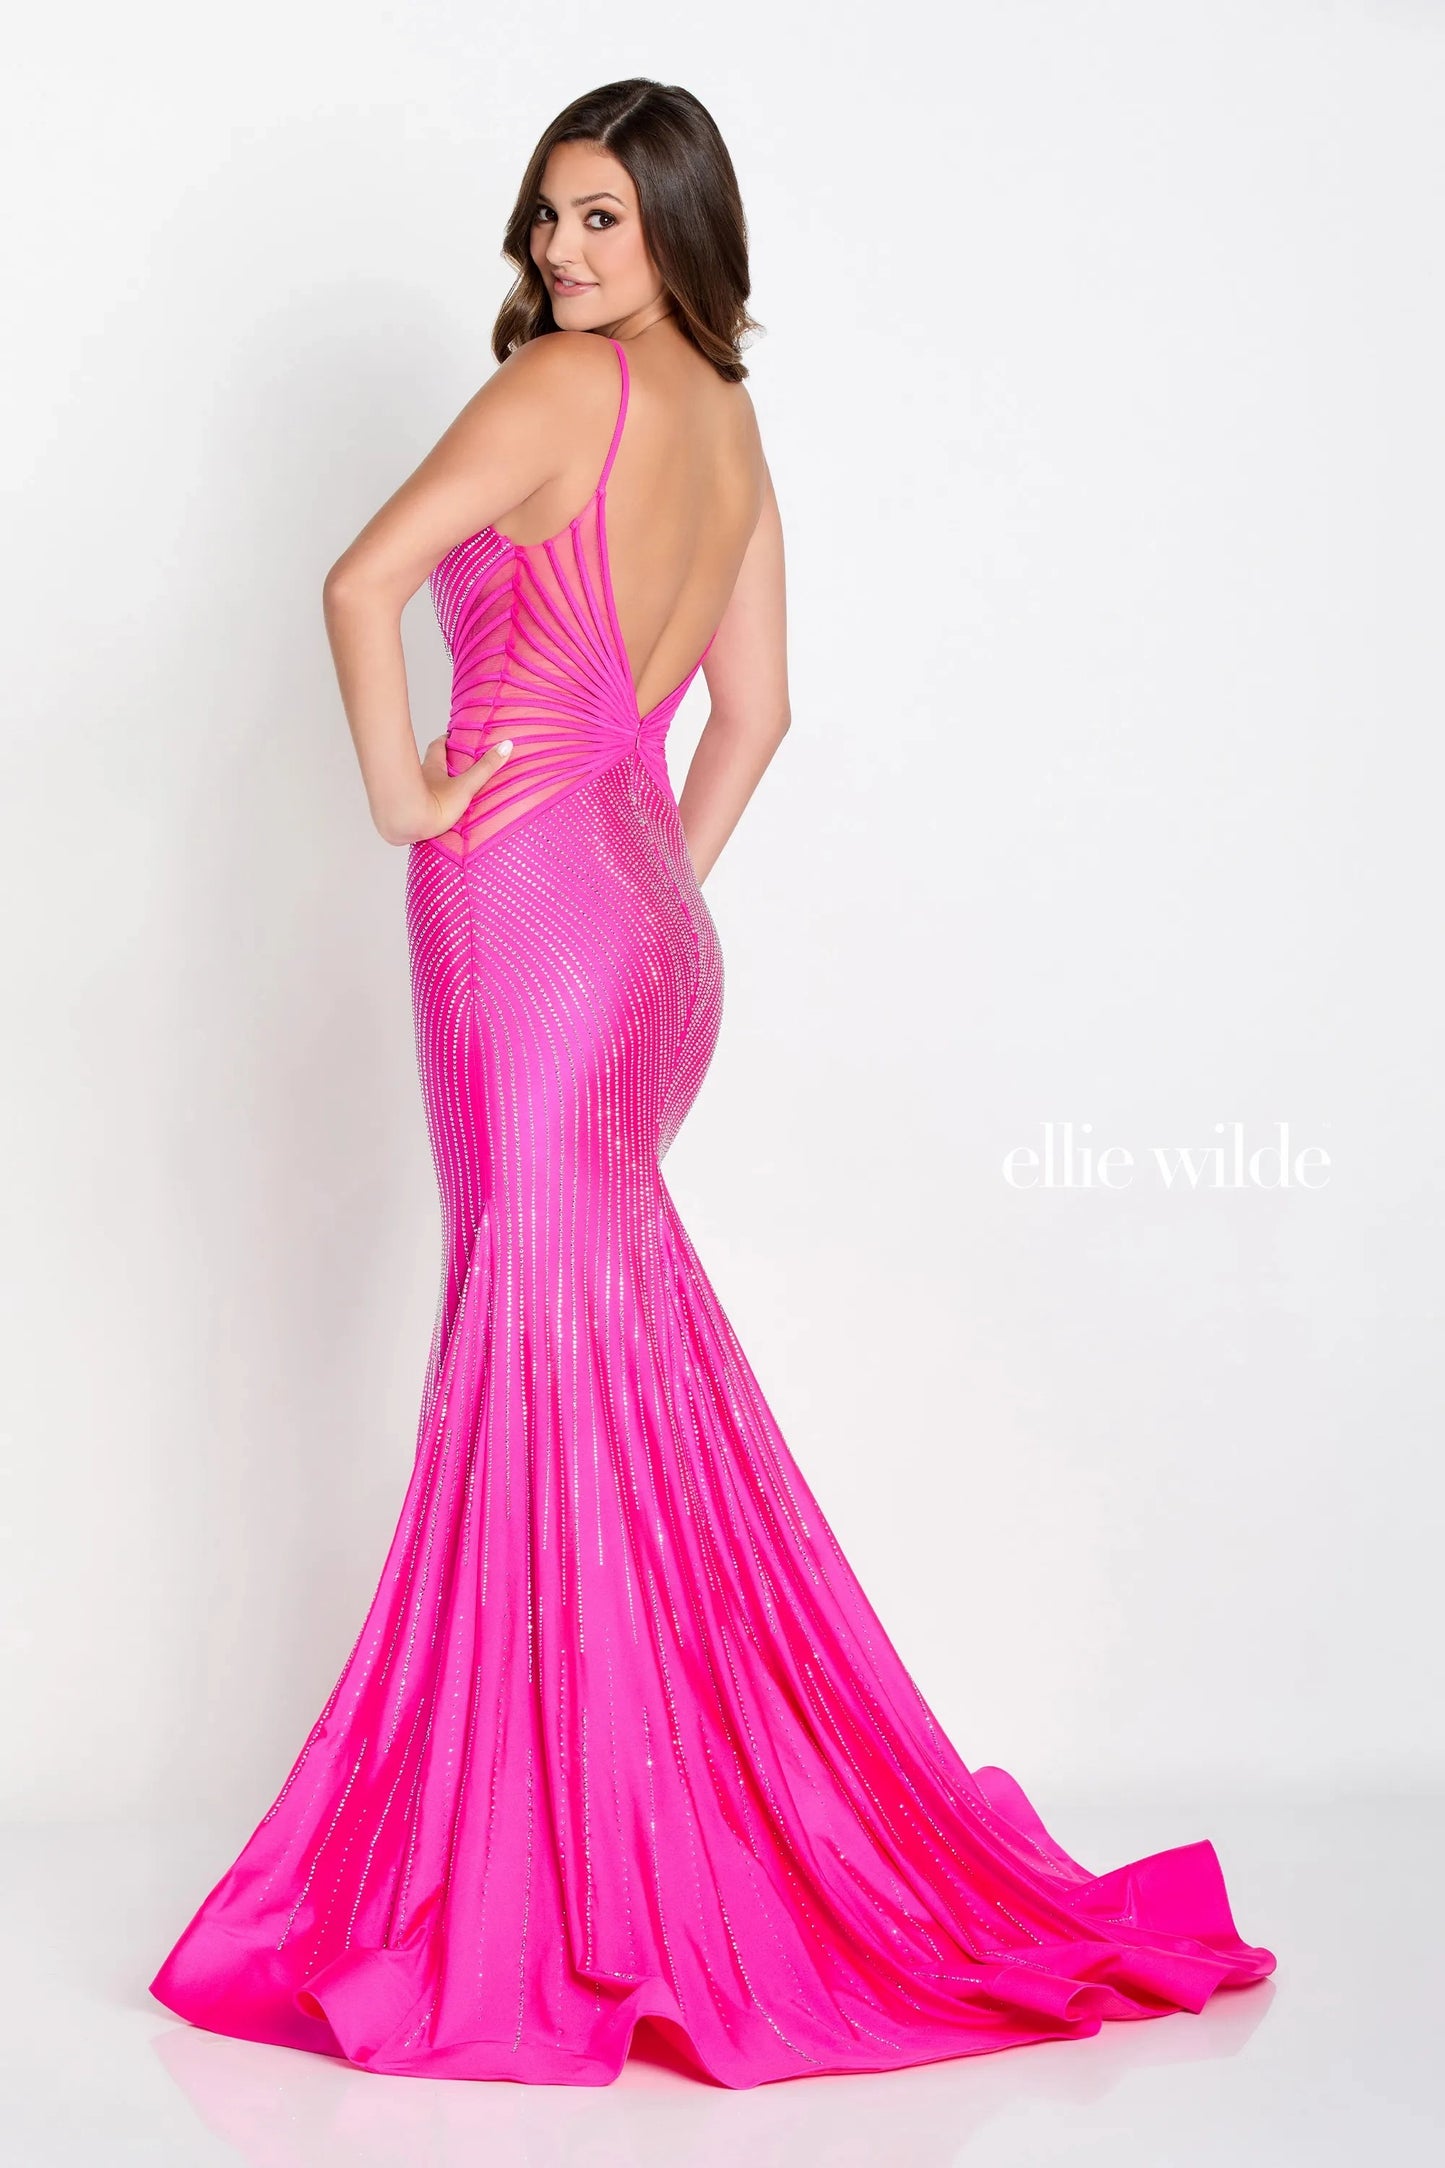 Prom Dresses Long Mermaid Formal Evening Beaded Prom Gown Hot Pink/Silver